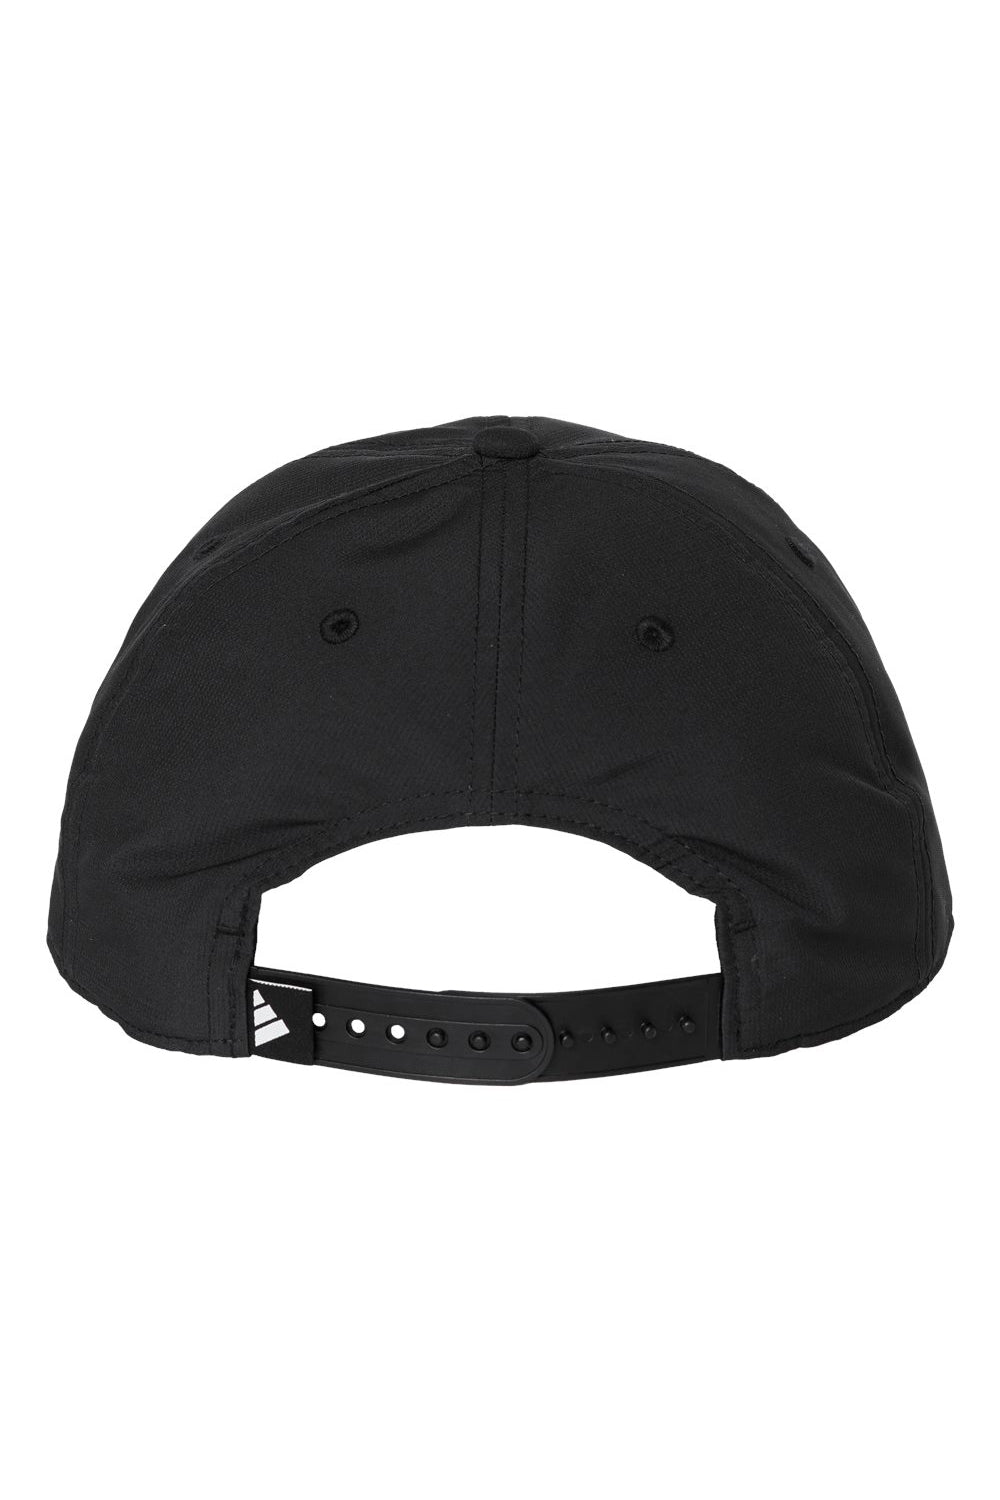 Adidas A600S Mens Sustainable Performance Max Moisture Wicking Snapback Hat Black Flat Back